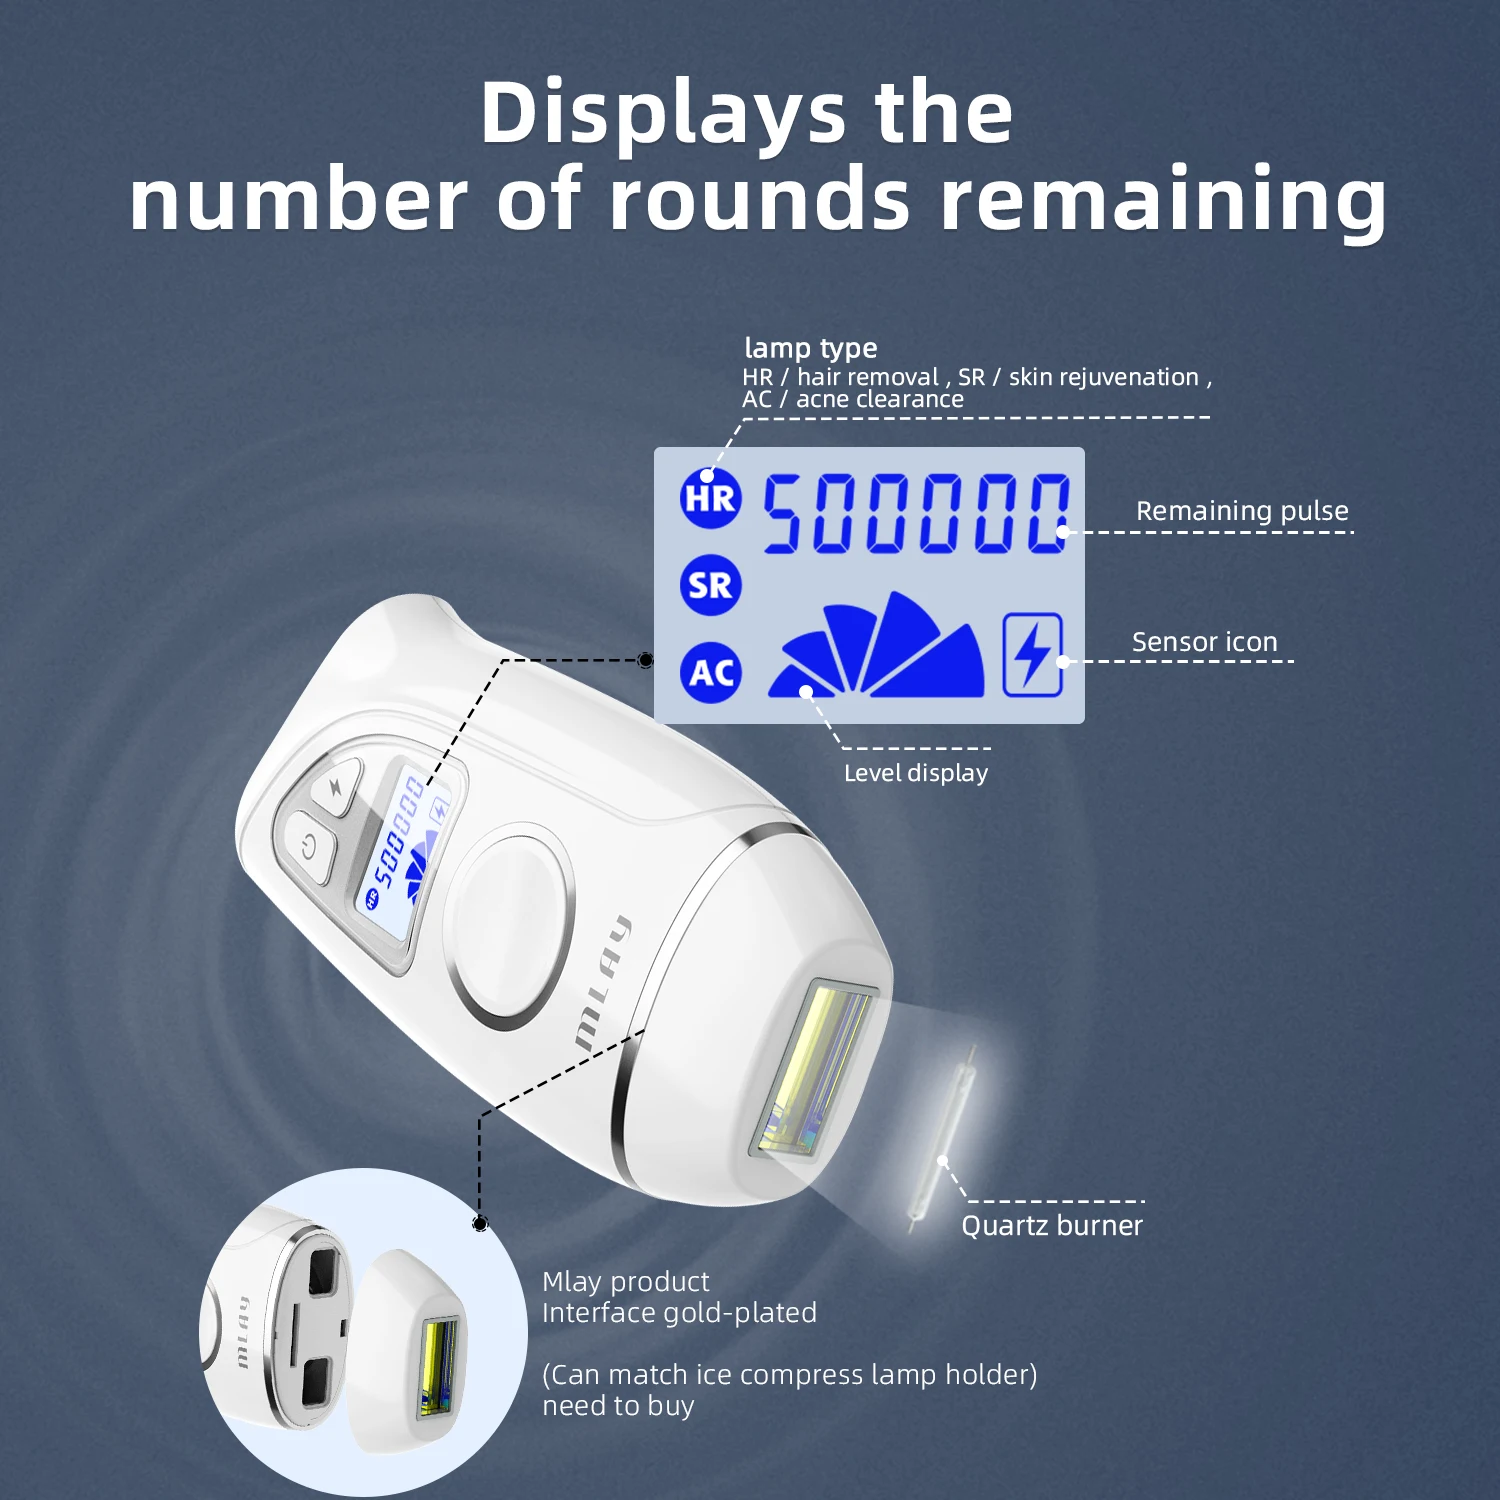 MLAY T7 Painless Facial Mobile Phone IPL Hair Removal Device for Skin Rejuvenation and Hair Removal in Bikini Armpit Area